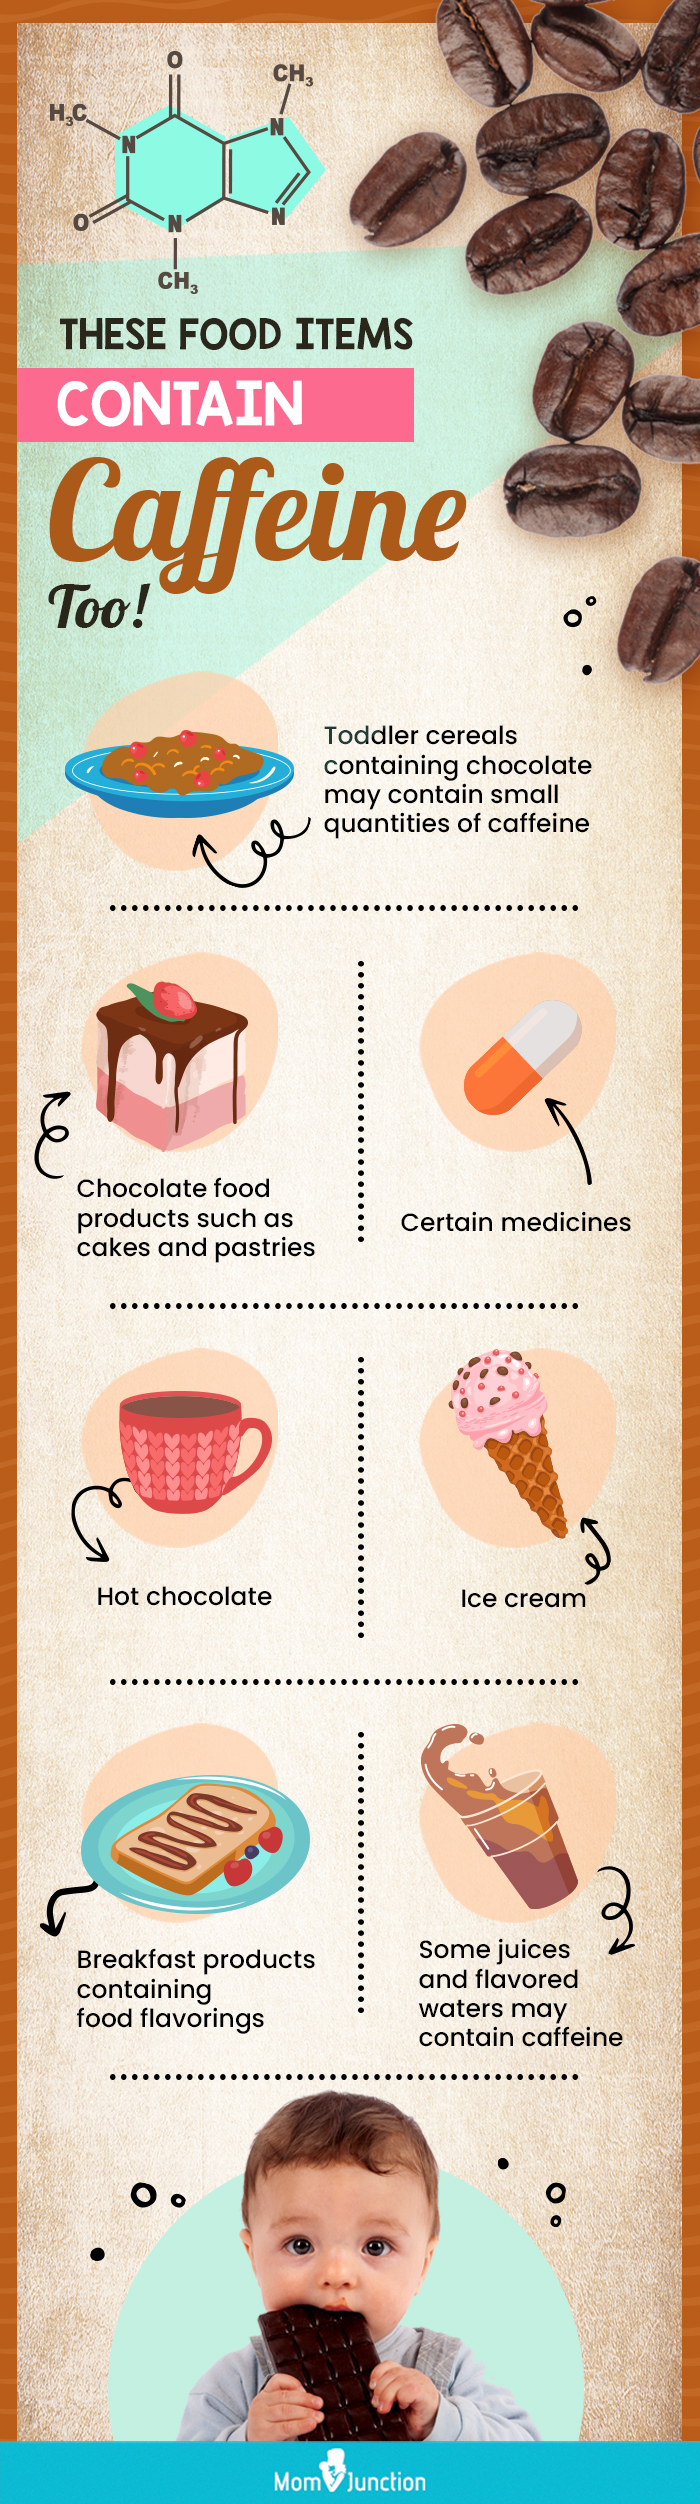 these food items contain caffeine tooo (infographic)